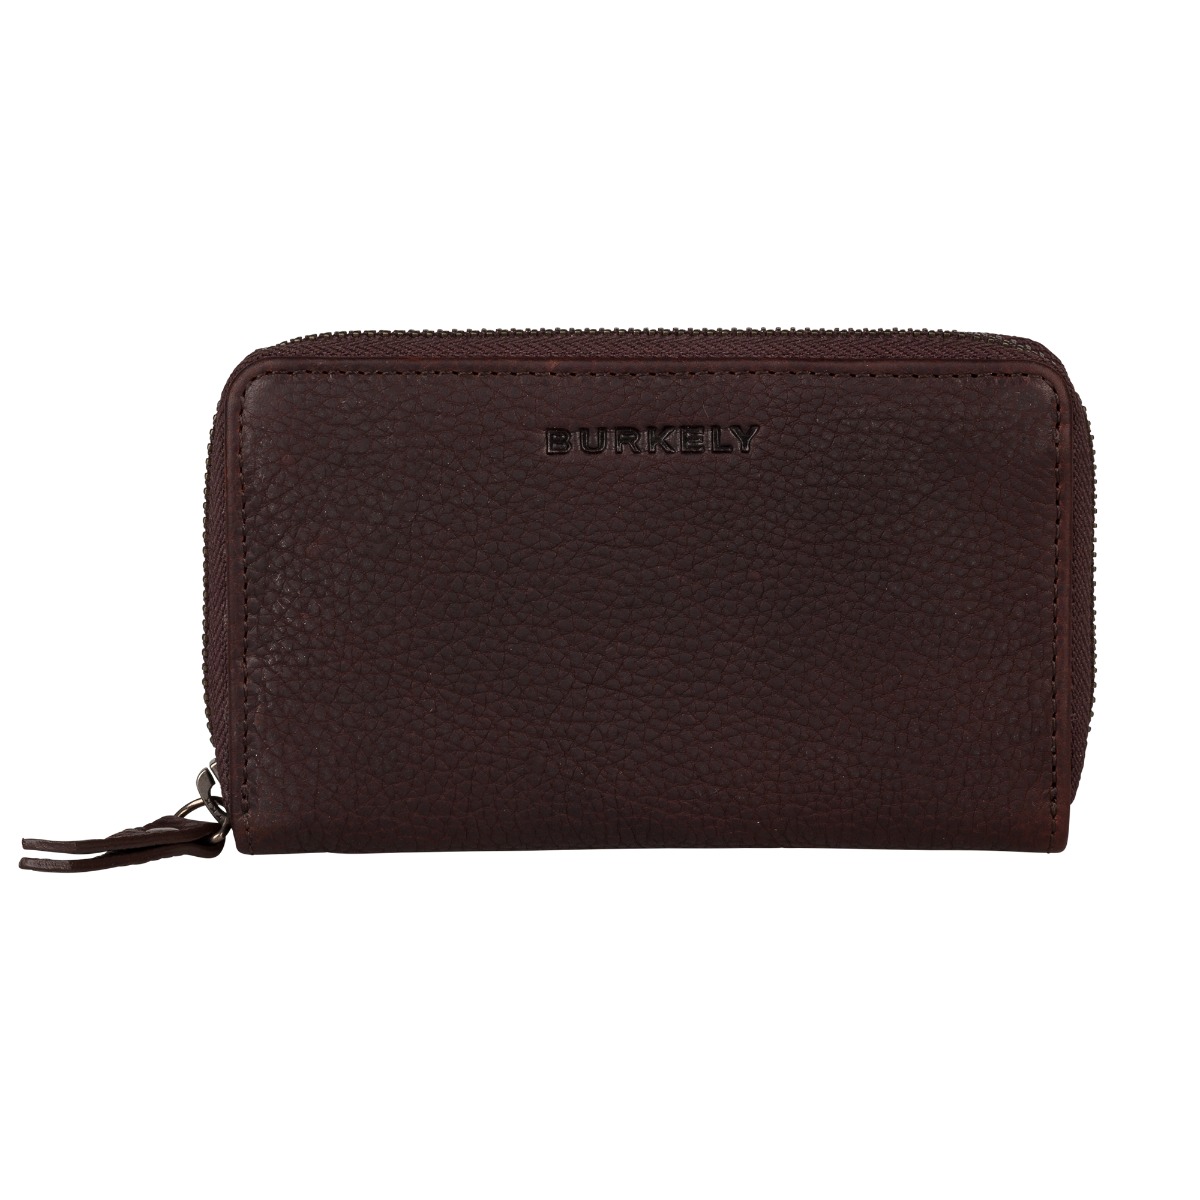 Burkely Antique Avery Wallet M Brown